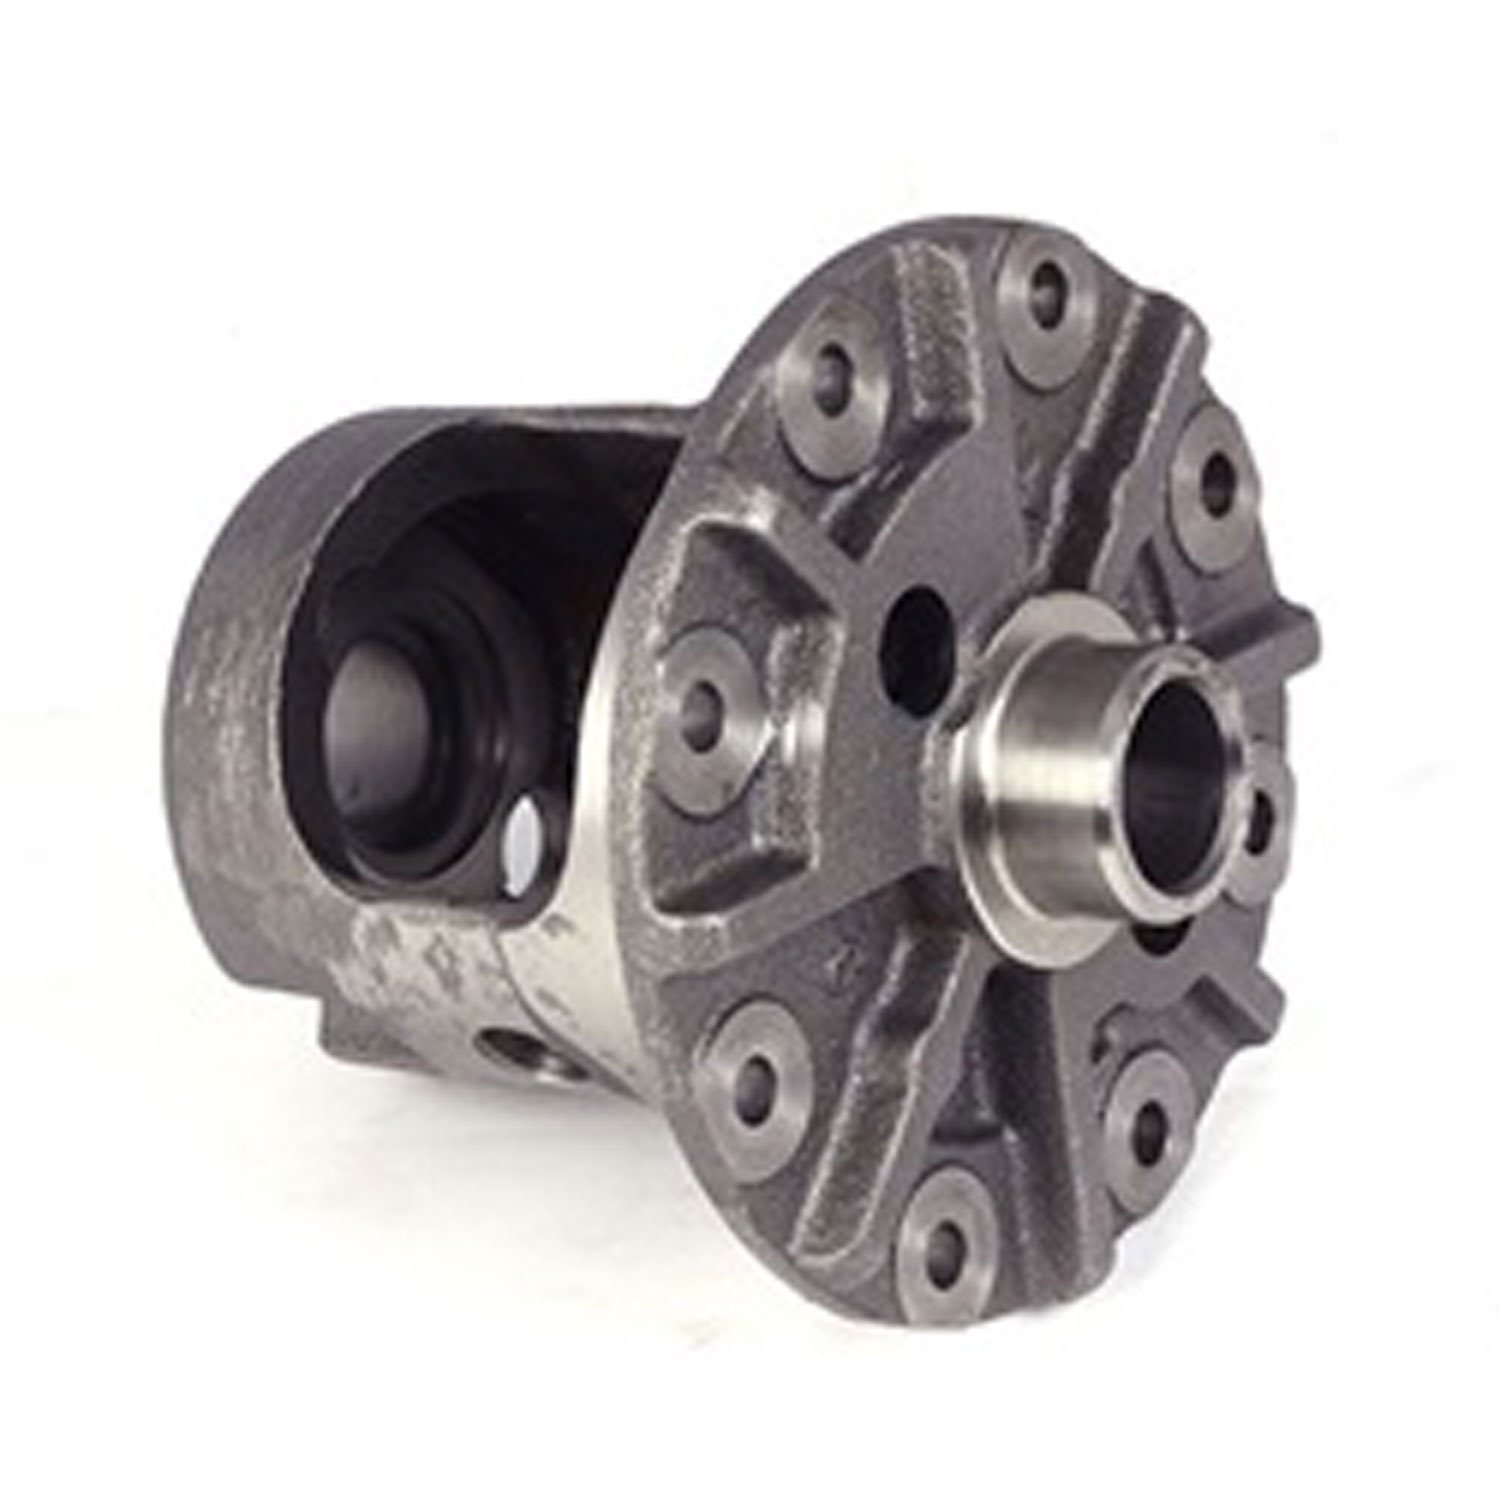 This empty differential carrier for Dana 35 Omix-ADA